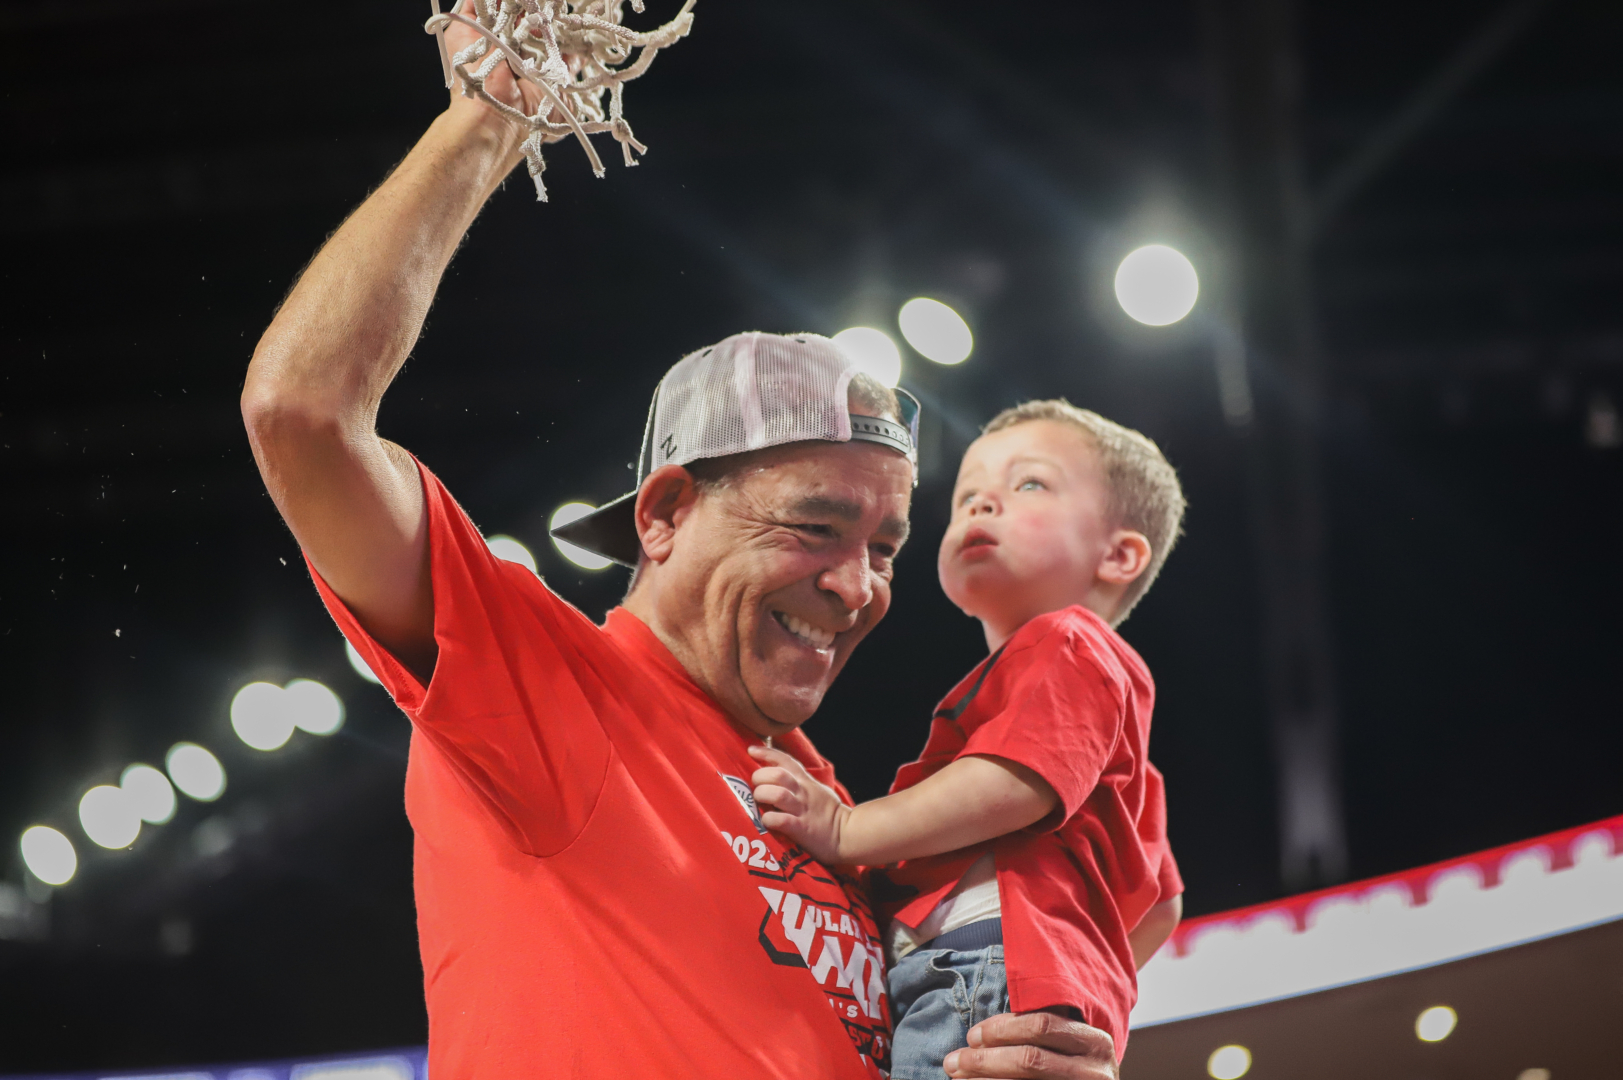 Holding his grandson Kylen, Kelvin Sampson was all smiles after cutting down his seventh net as the UH head coach after the top-ranked Cougars' win over Wichita State on Thursday night. | Anh Le/The Cougar